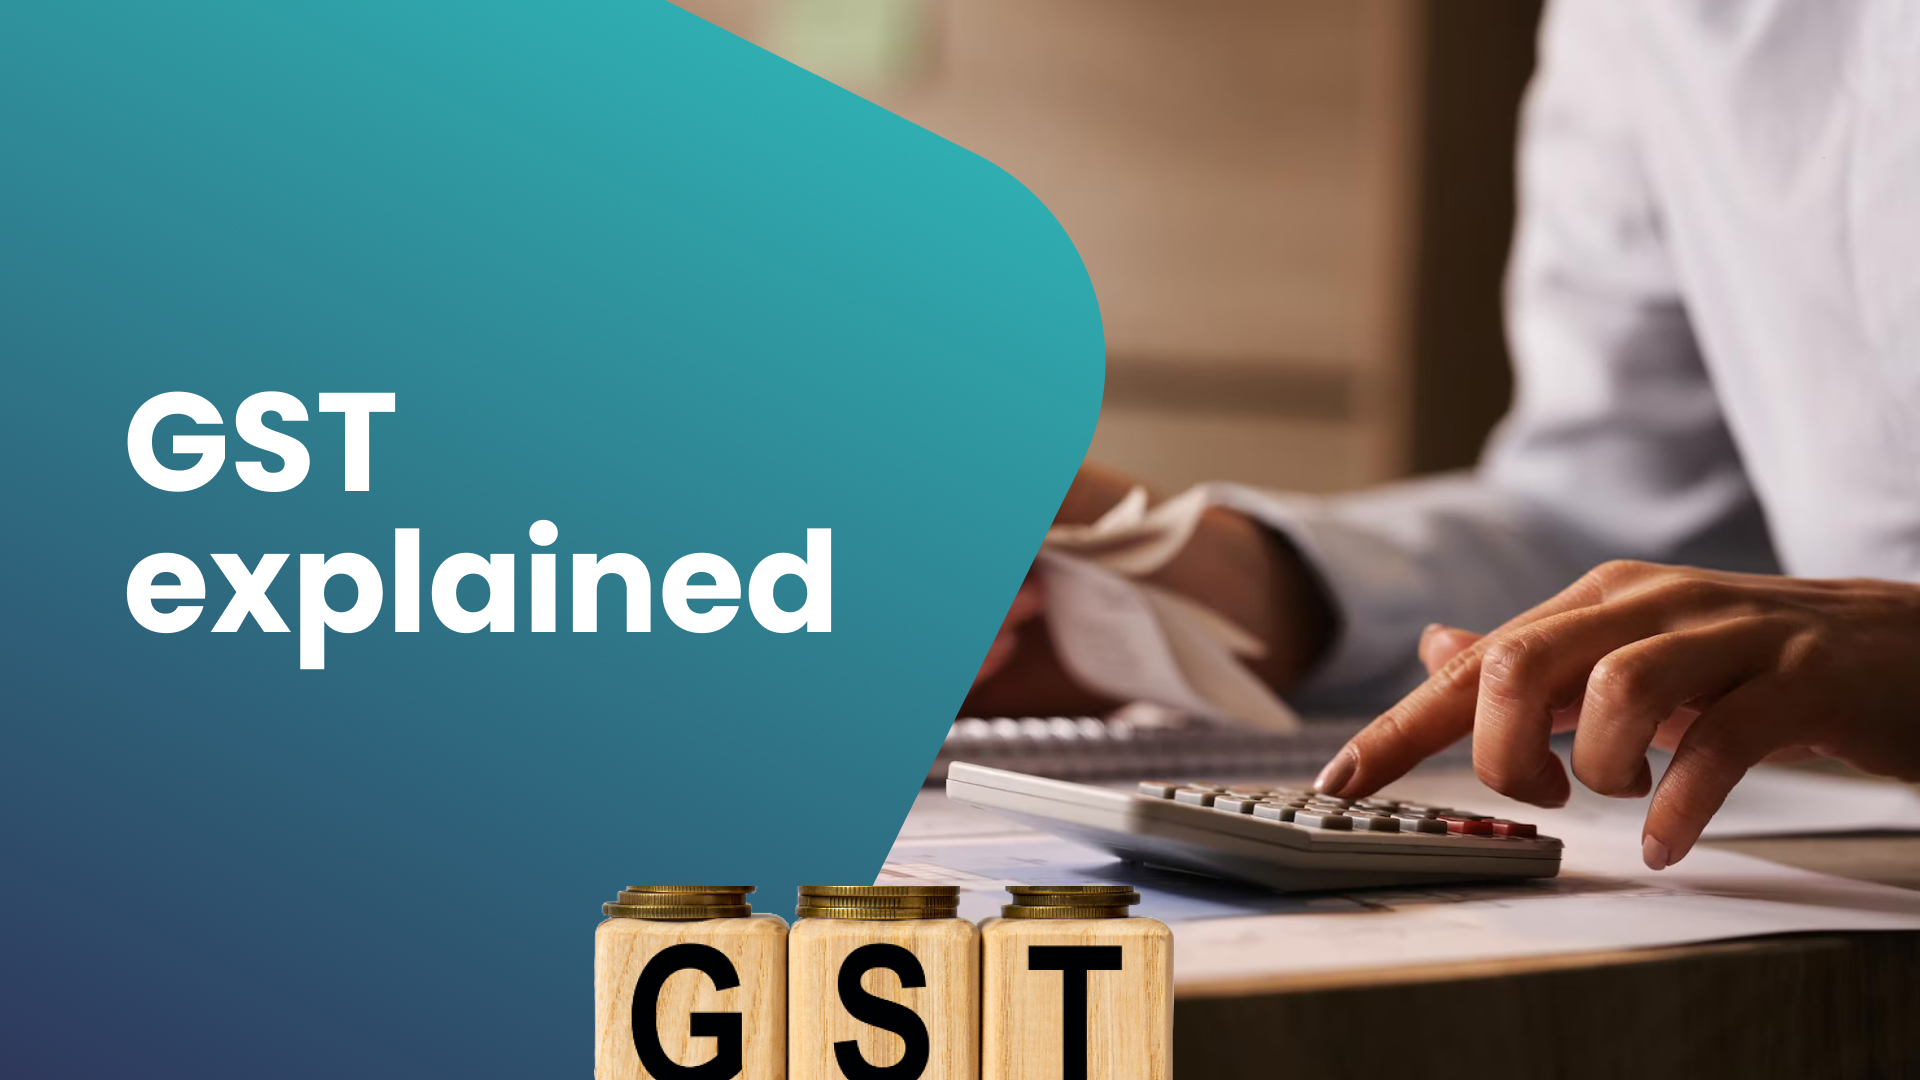 Course Trailer: All You Must Know About GST. Watch to know more.